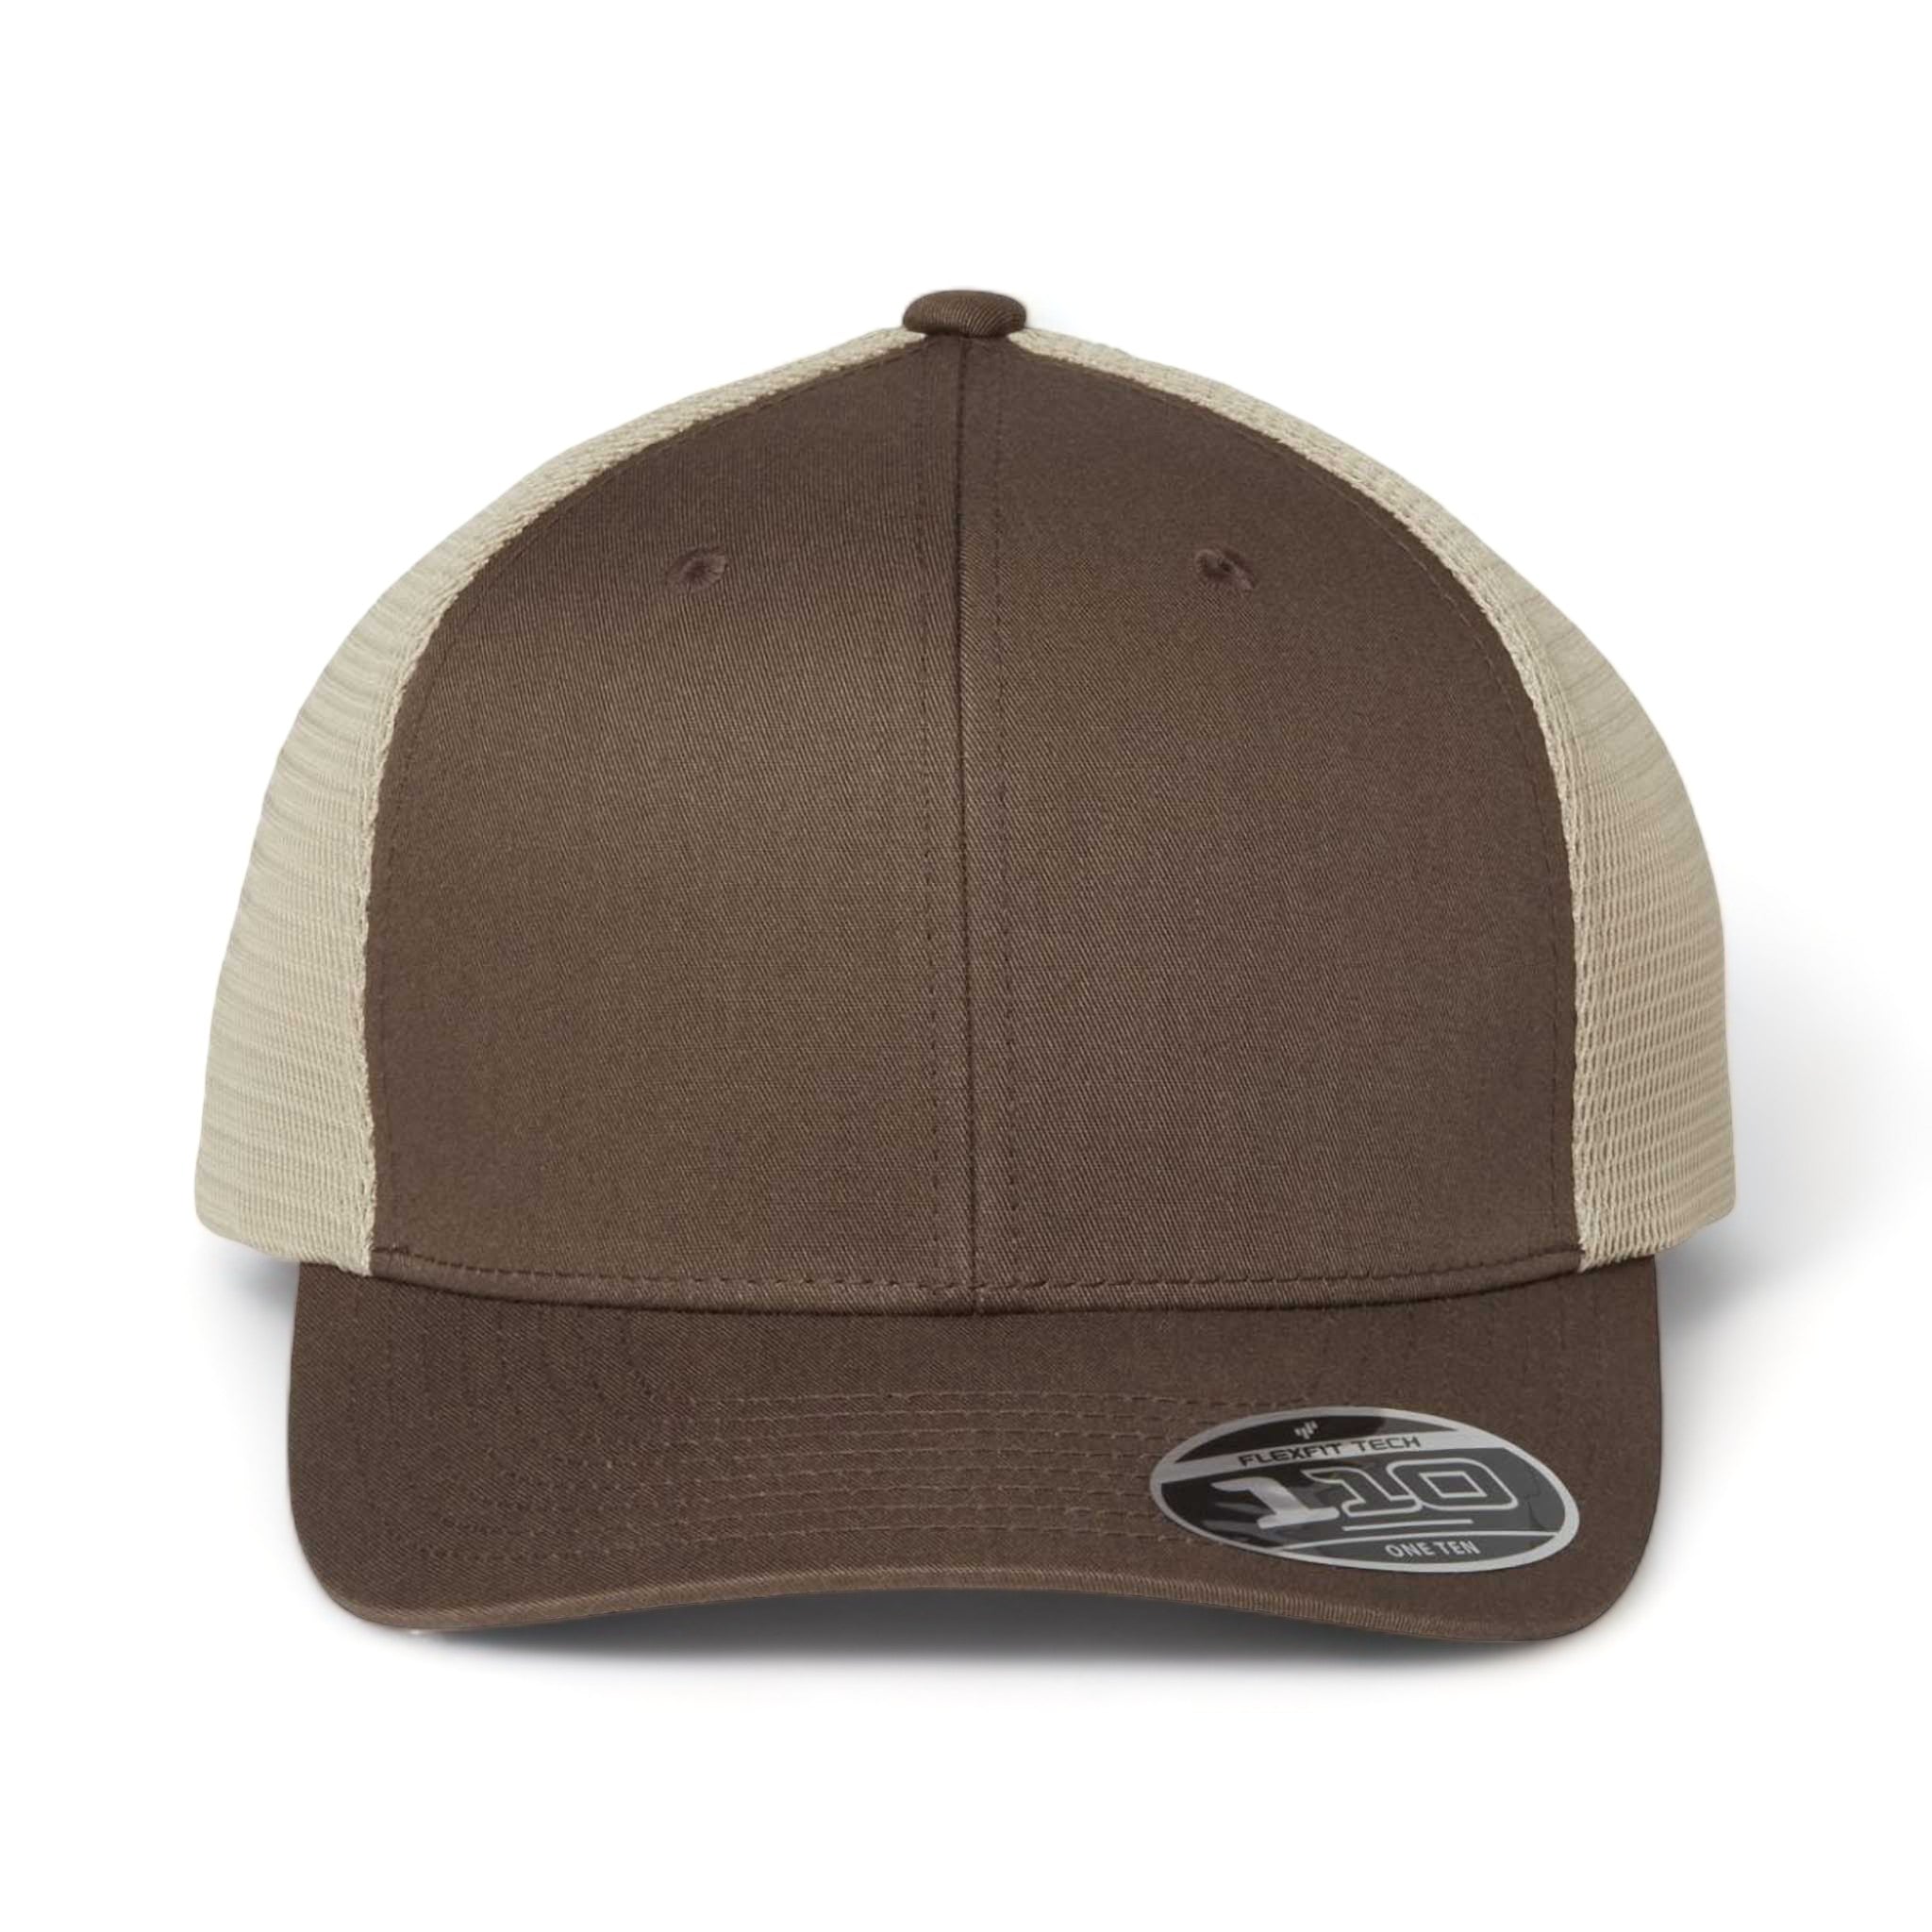 Front view of Flexfit 110M custom hat in brown and khaki